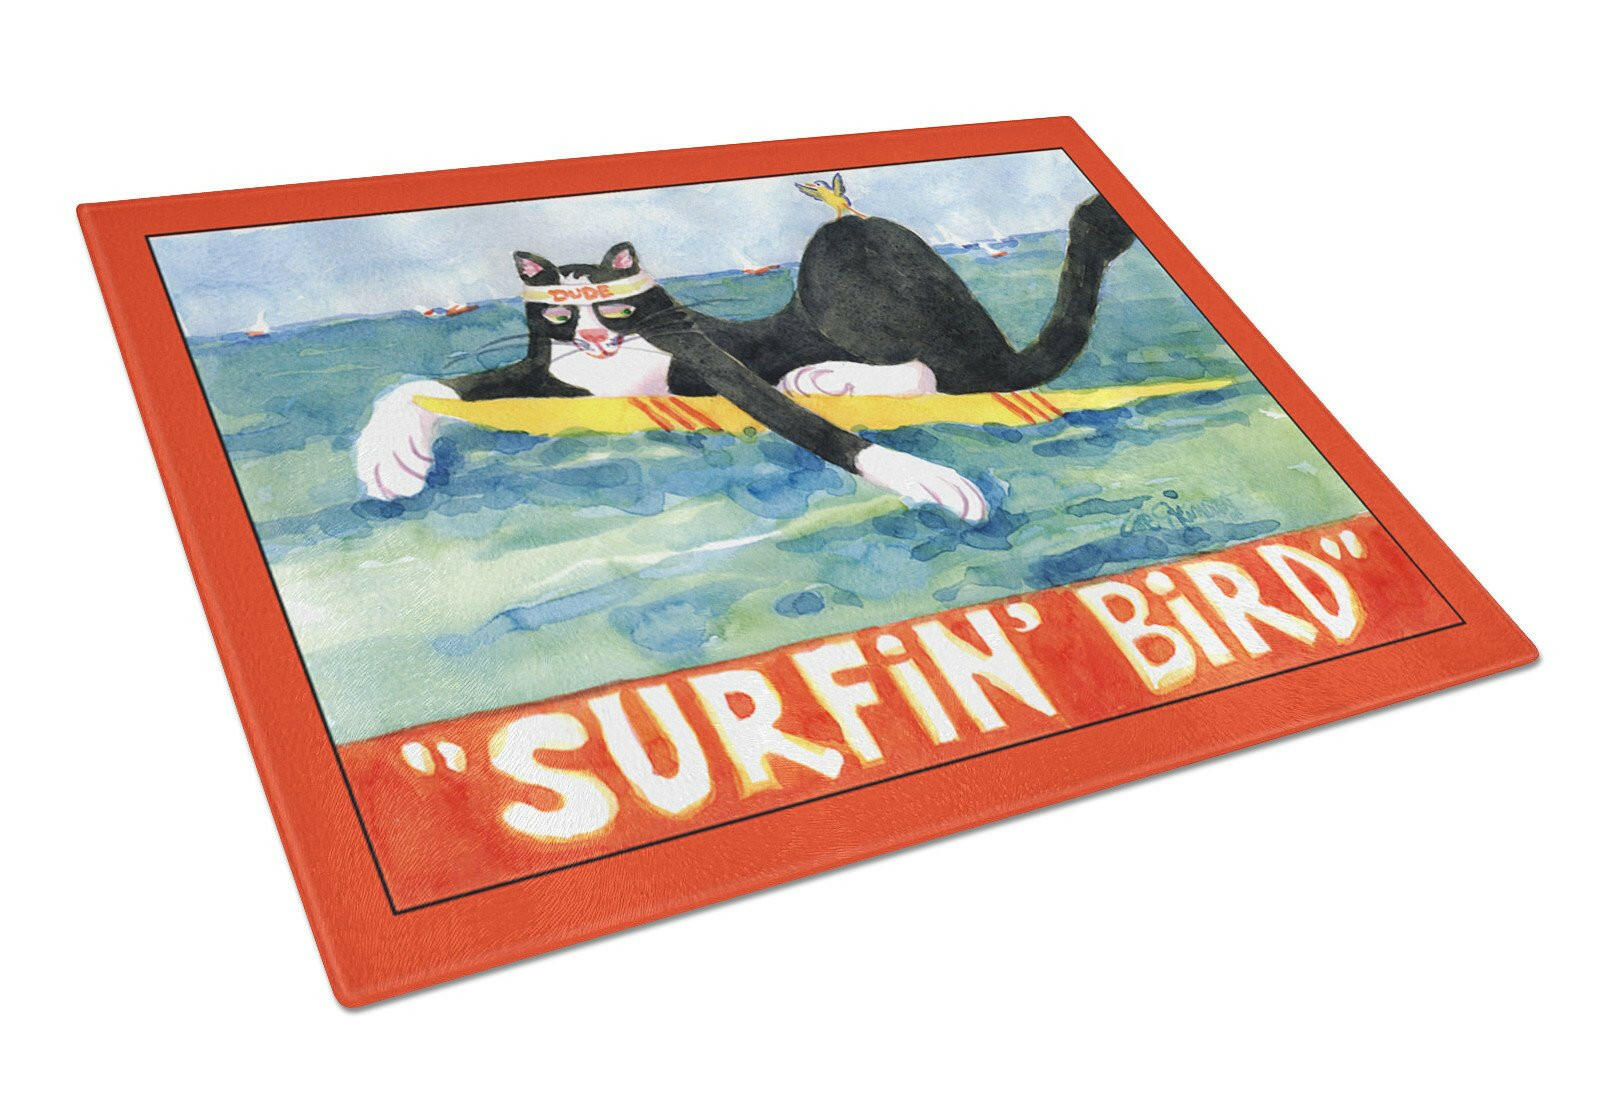 Black and white Cat Surfin Bird Glass Cutting Board Large by Caroline's Treasures